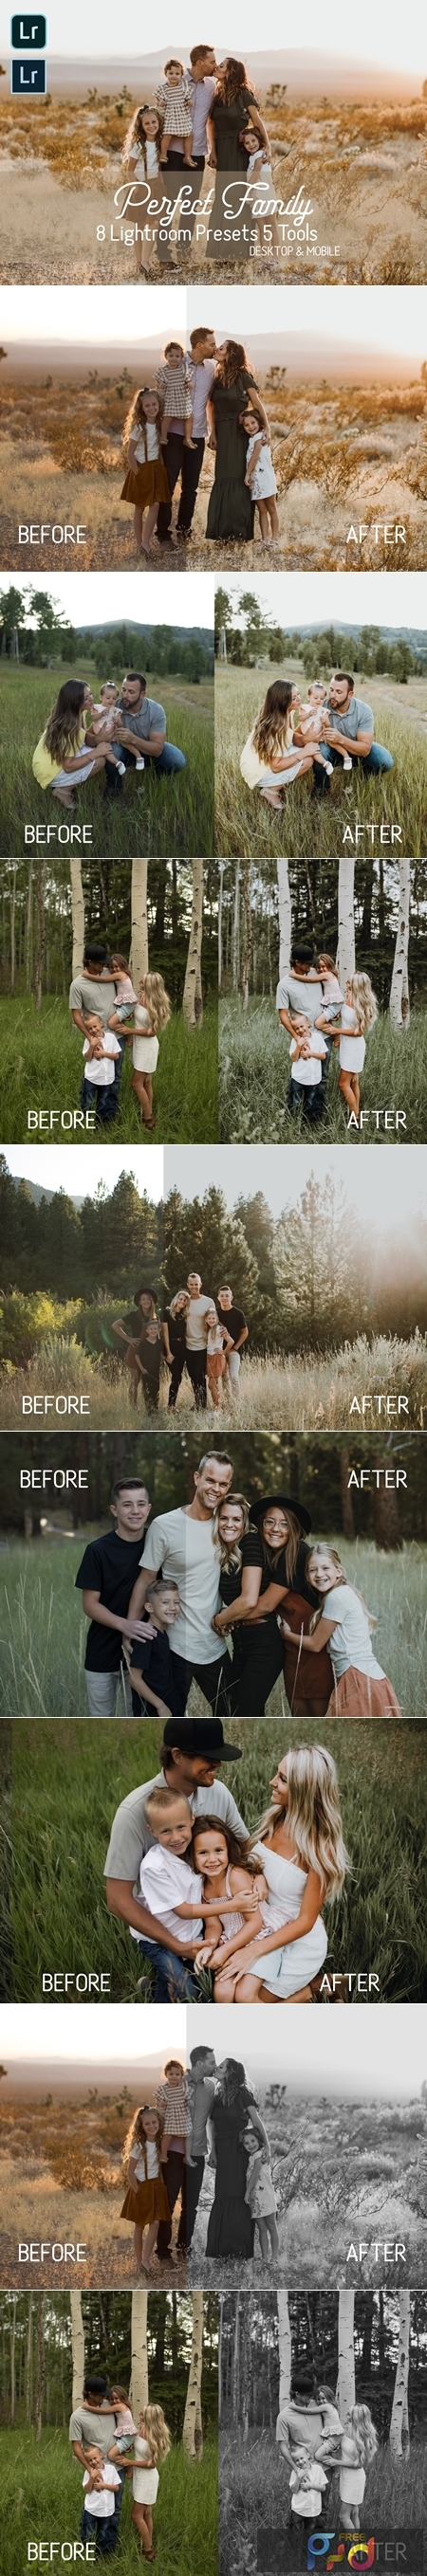 Perfect Family Lightroom Presets 4260461 1